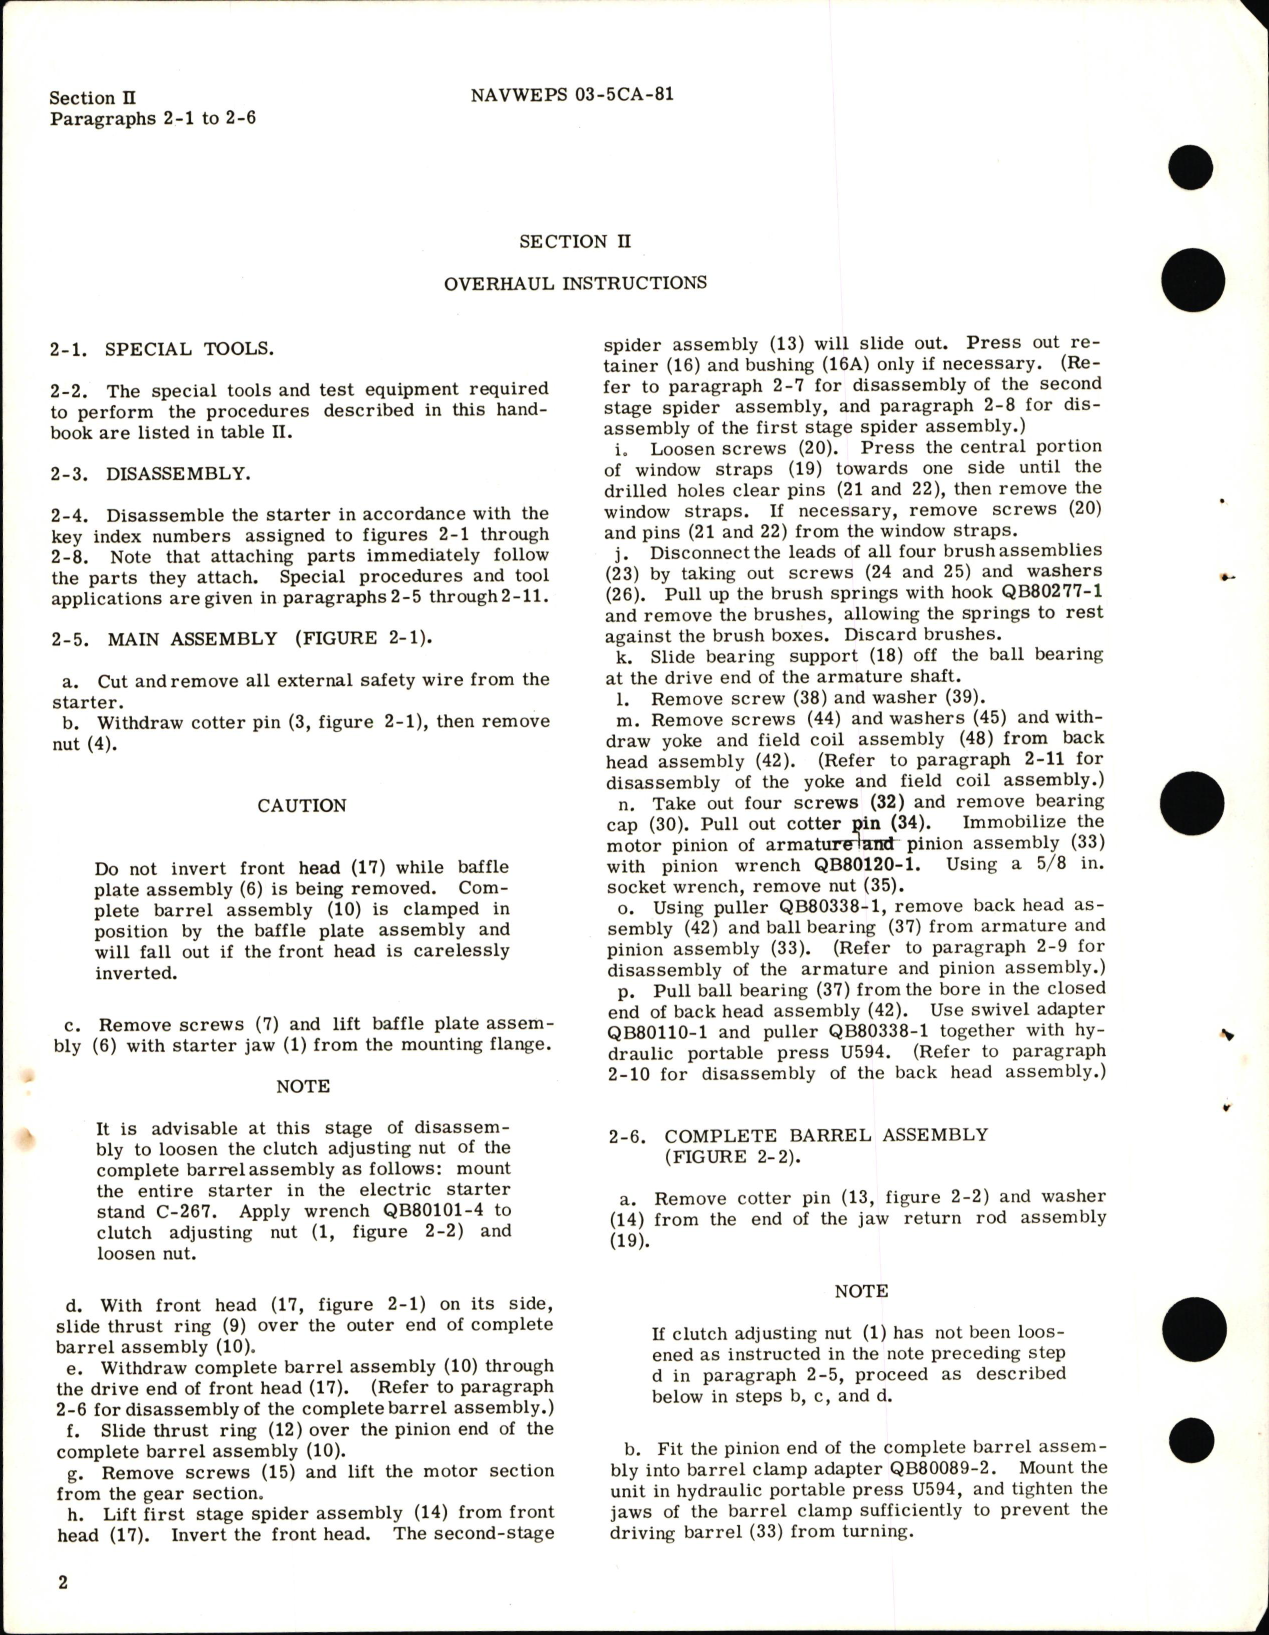 Sample page 8 from AirCorps Library document: Overhaul Instructions for Direct Cranking Electric Starter Part 1416 Series 